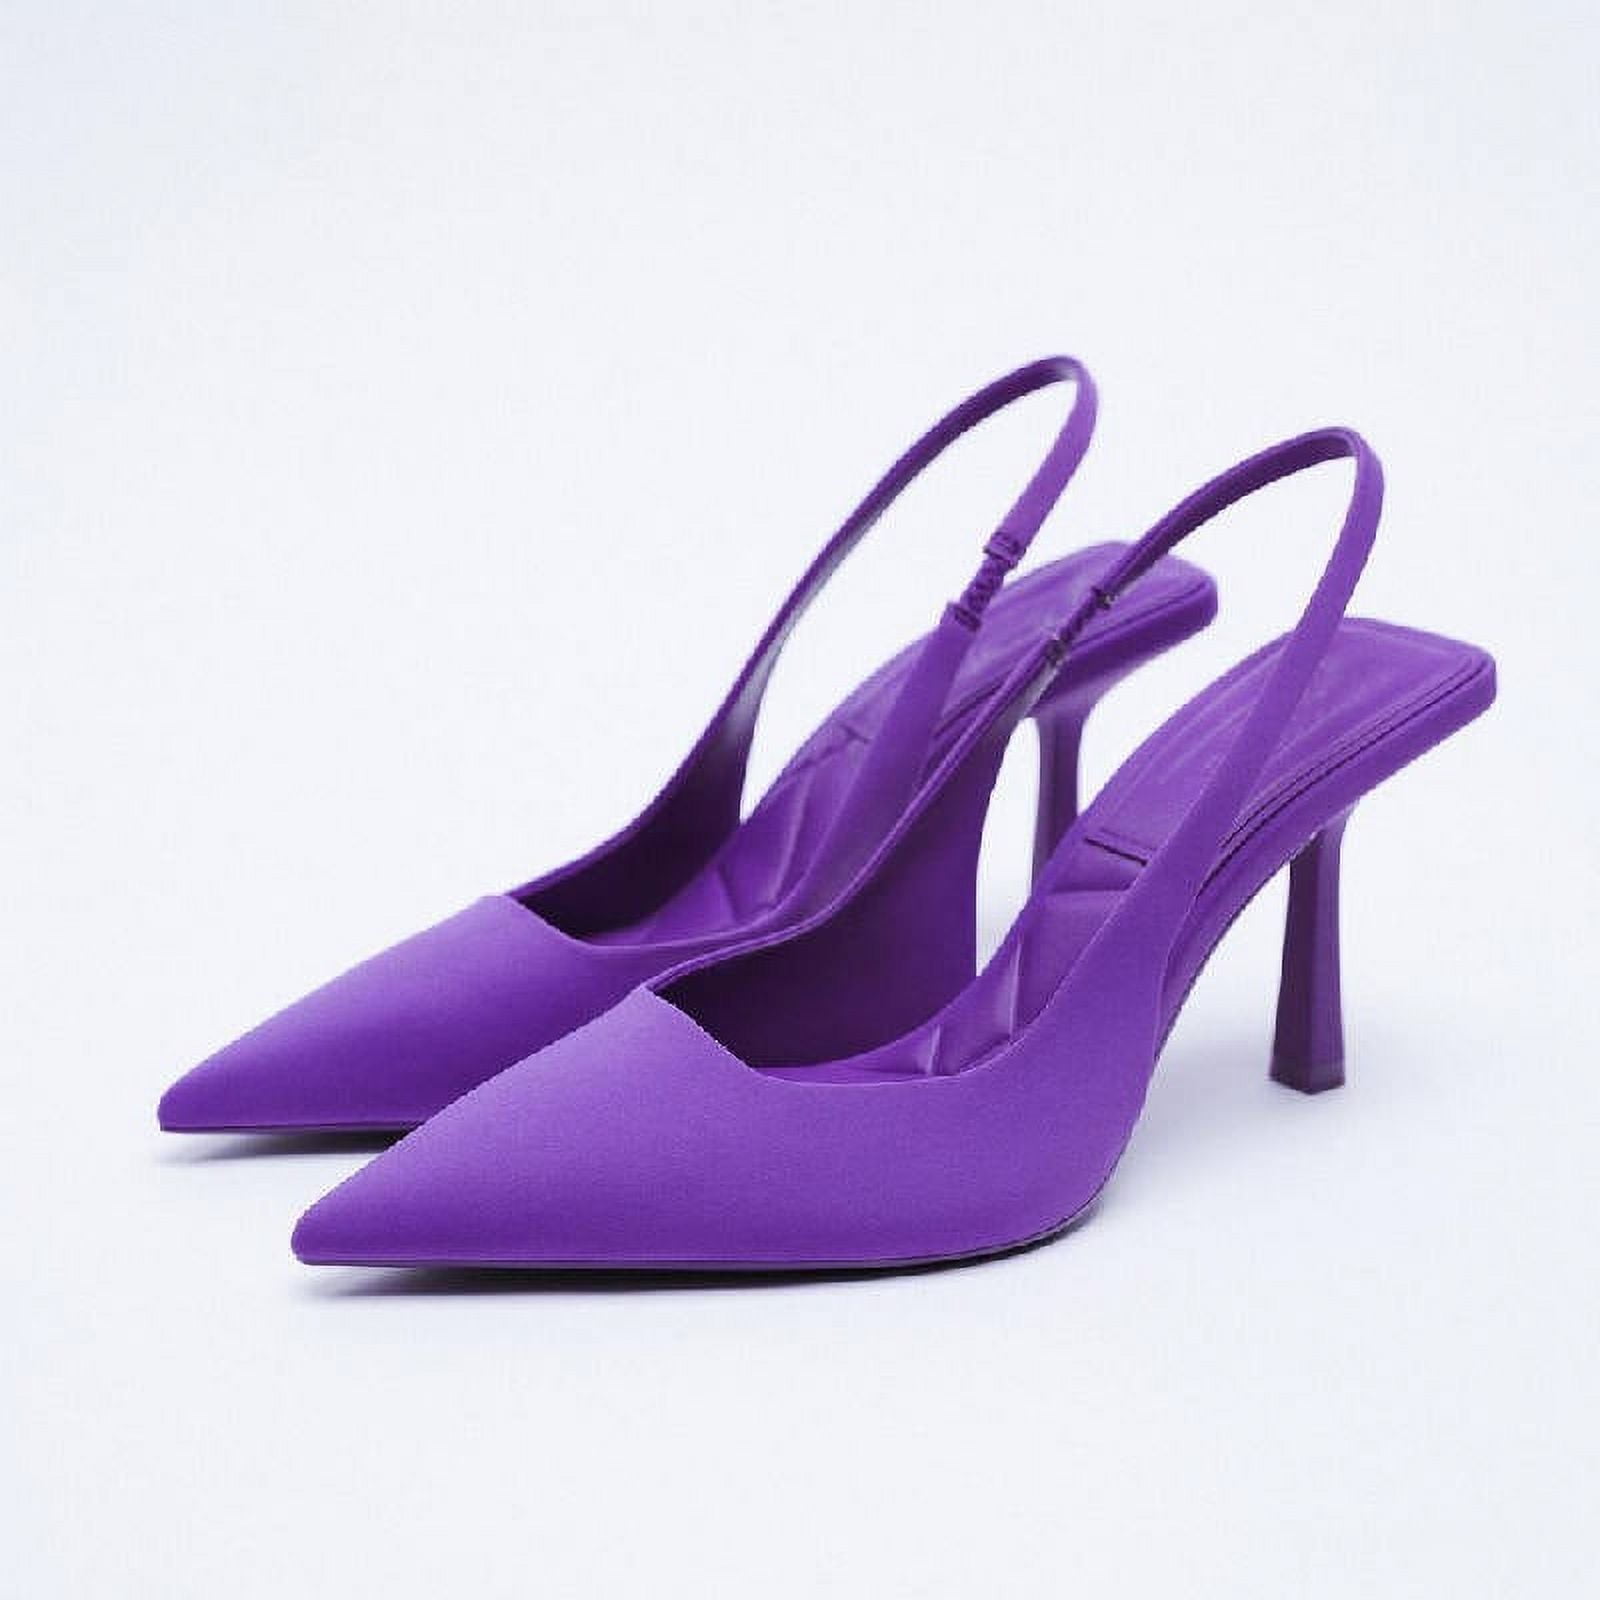 purple wedding shoes products for sale | eBay